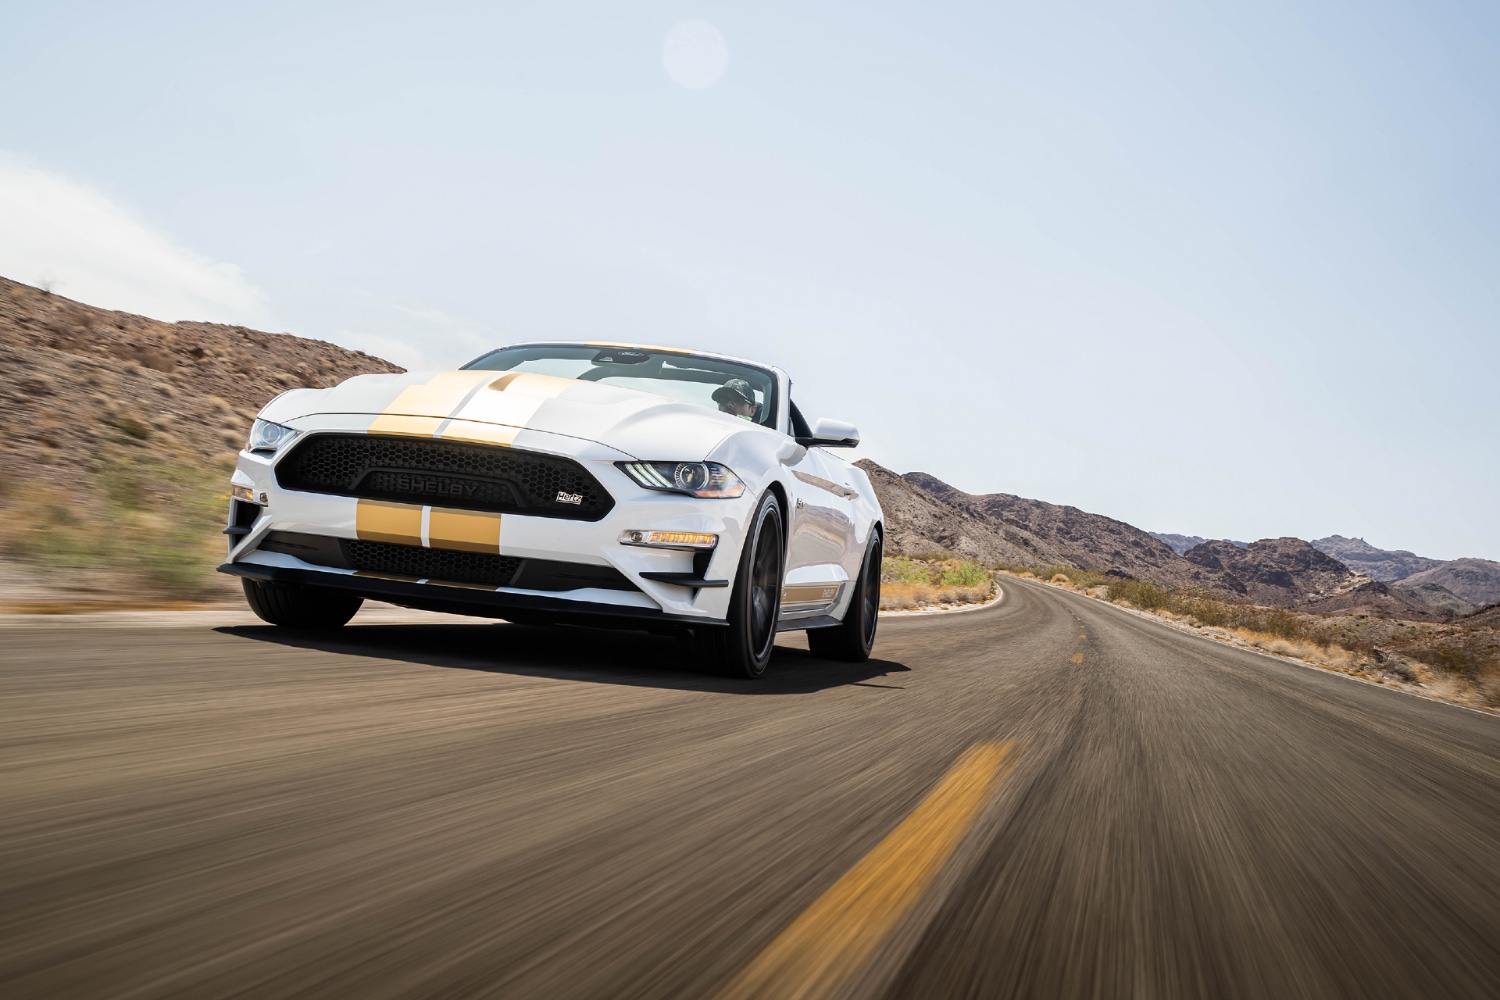 White and gold 2022 Shelby GT-H Convertible driving on a two-lane road in the desert with blue skies.